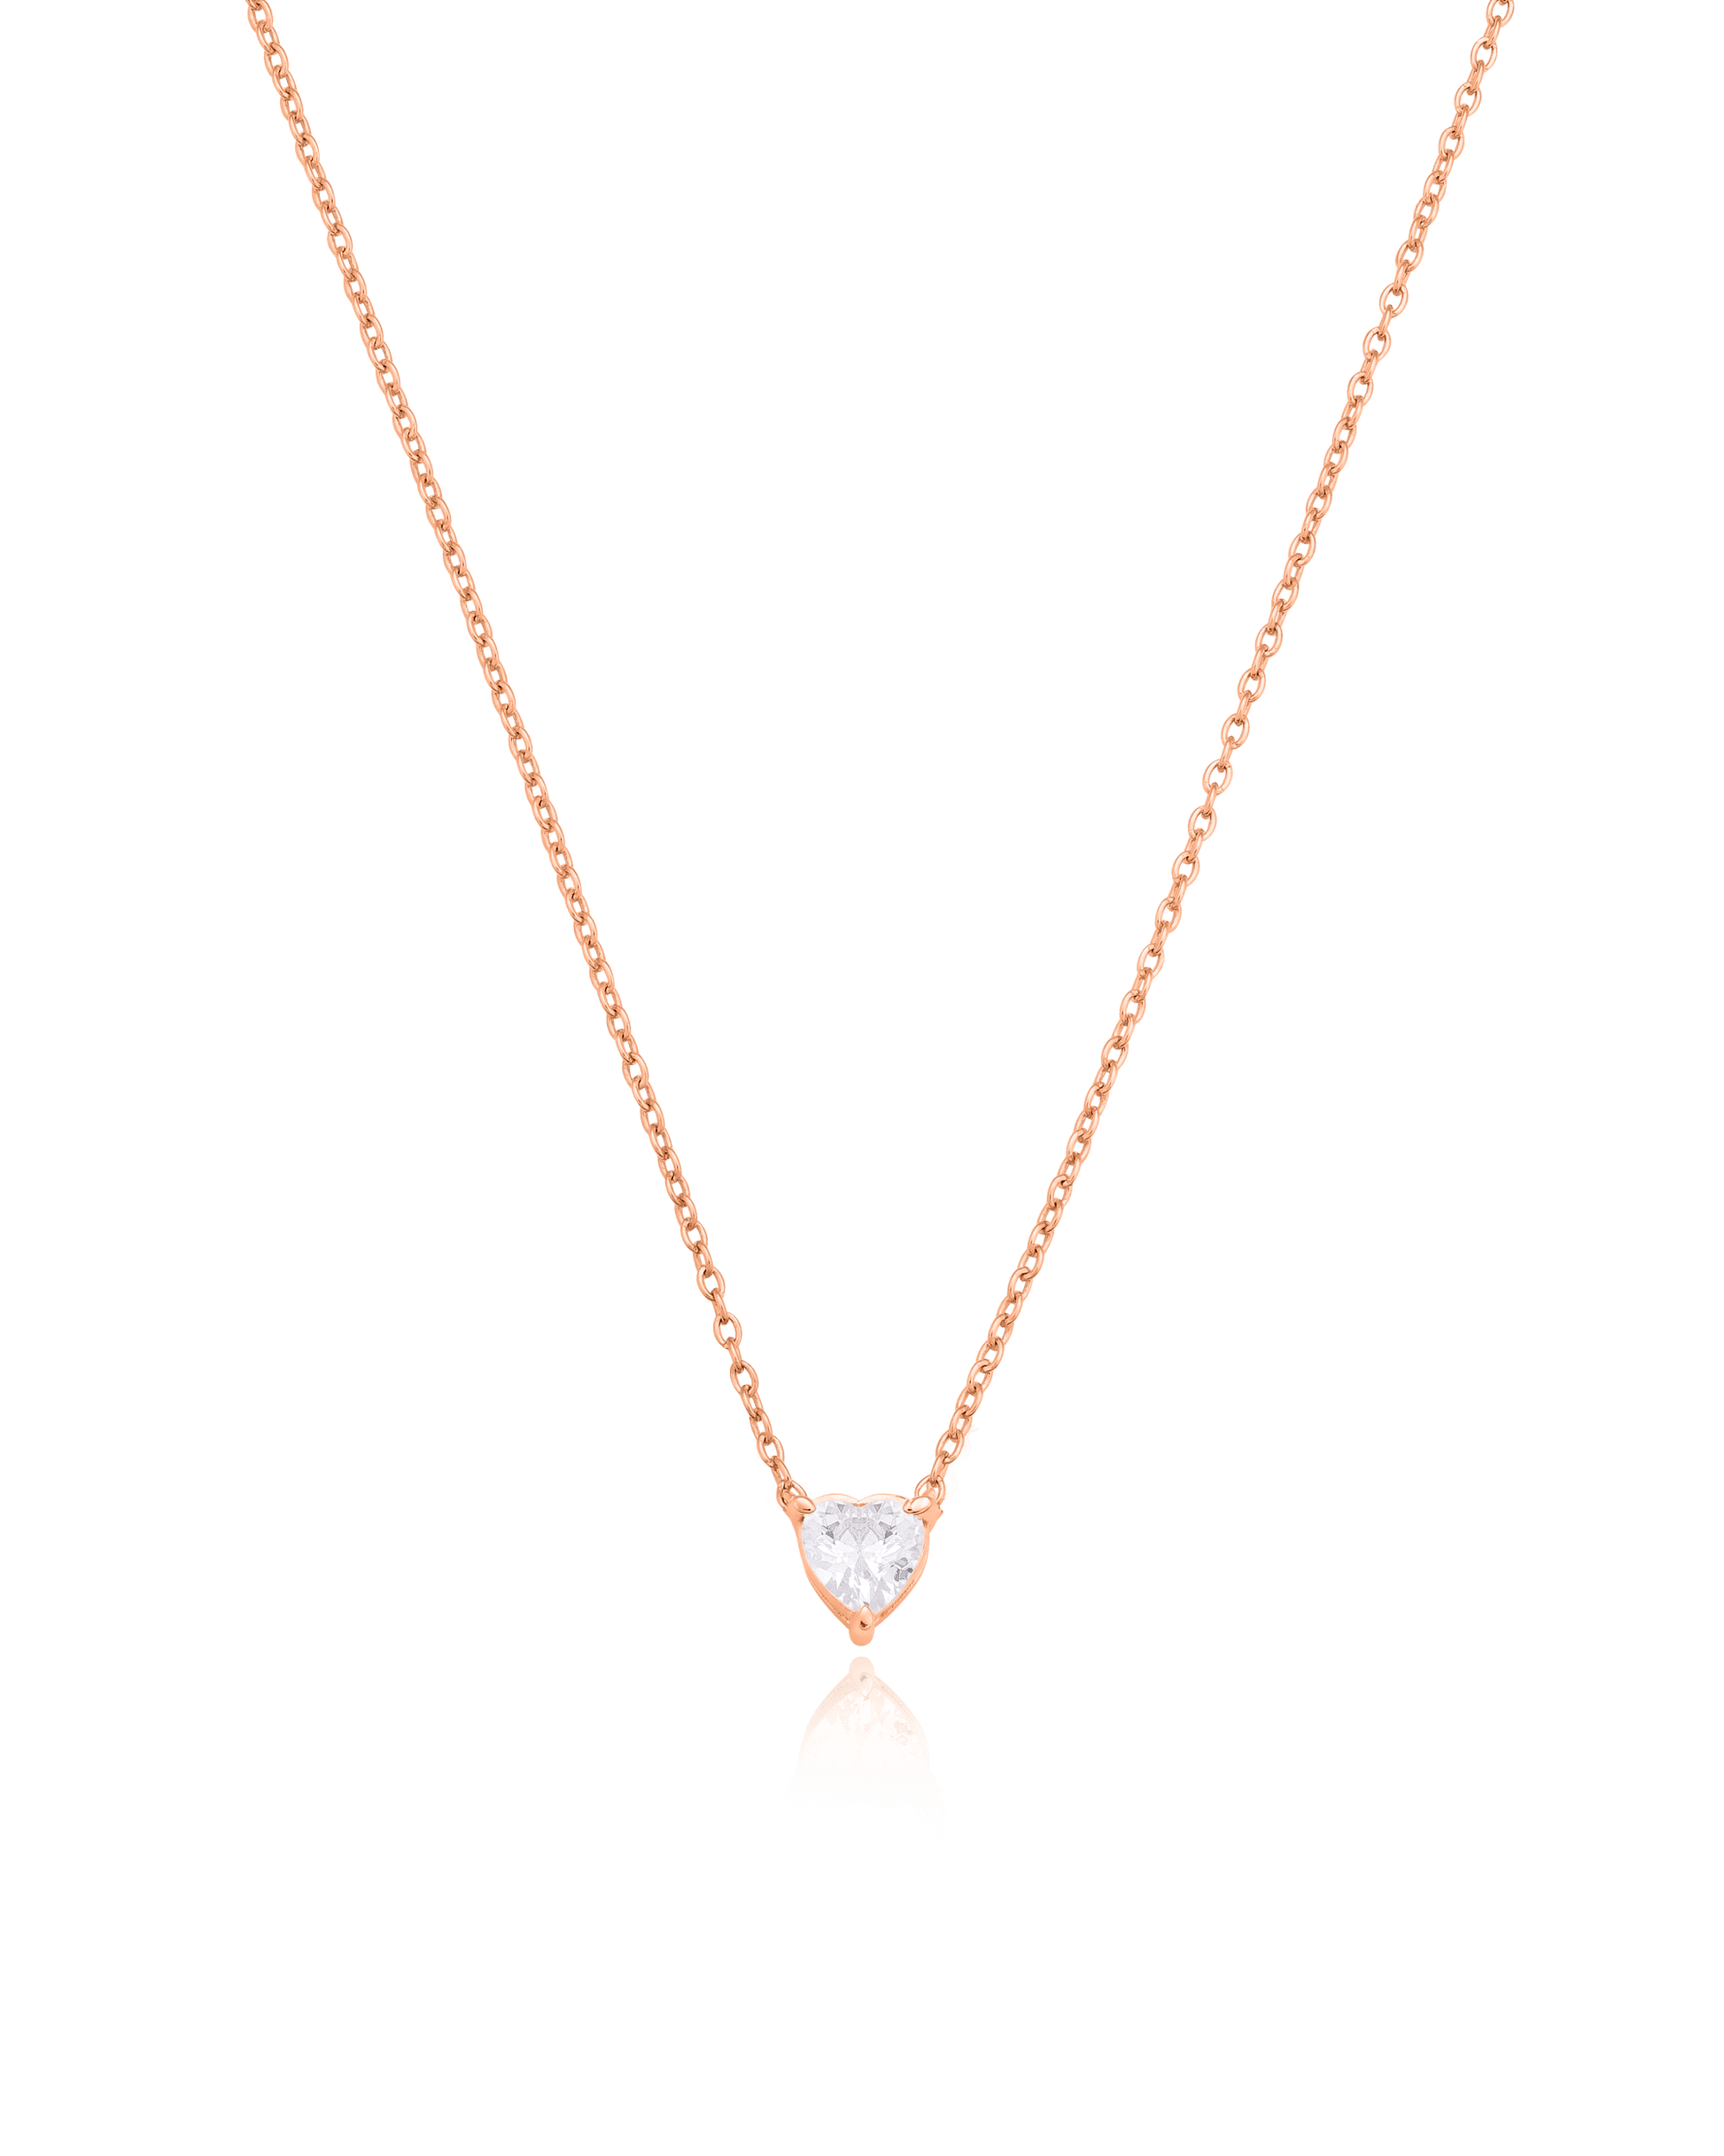 Heart Solitaire Diamond Necklace - 14K Yellow Gold Necklaces magal-dev 